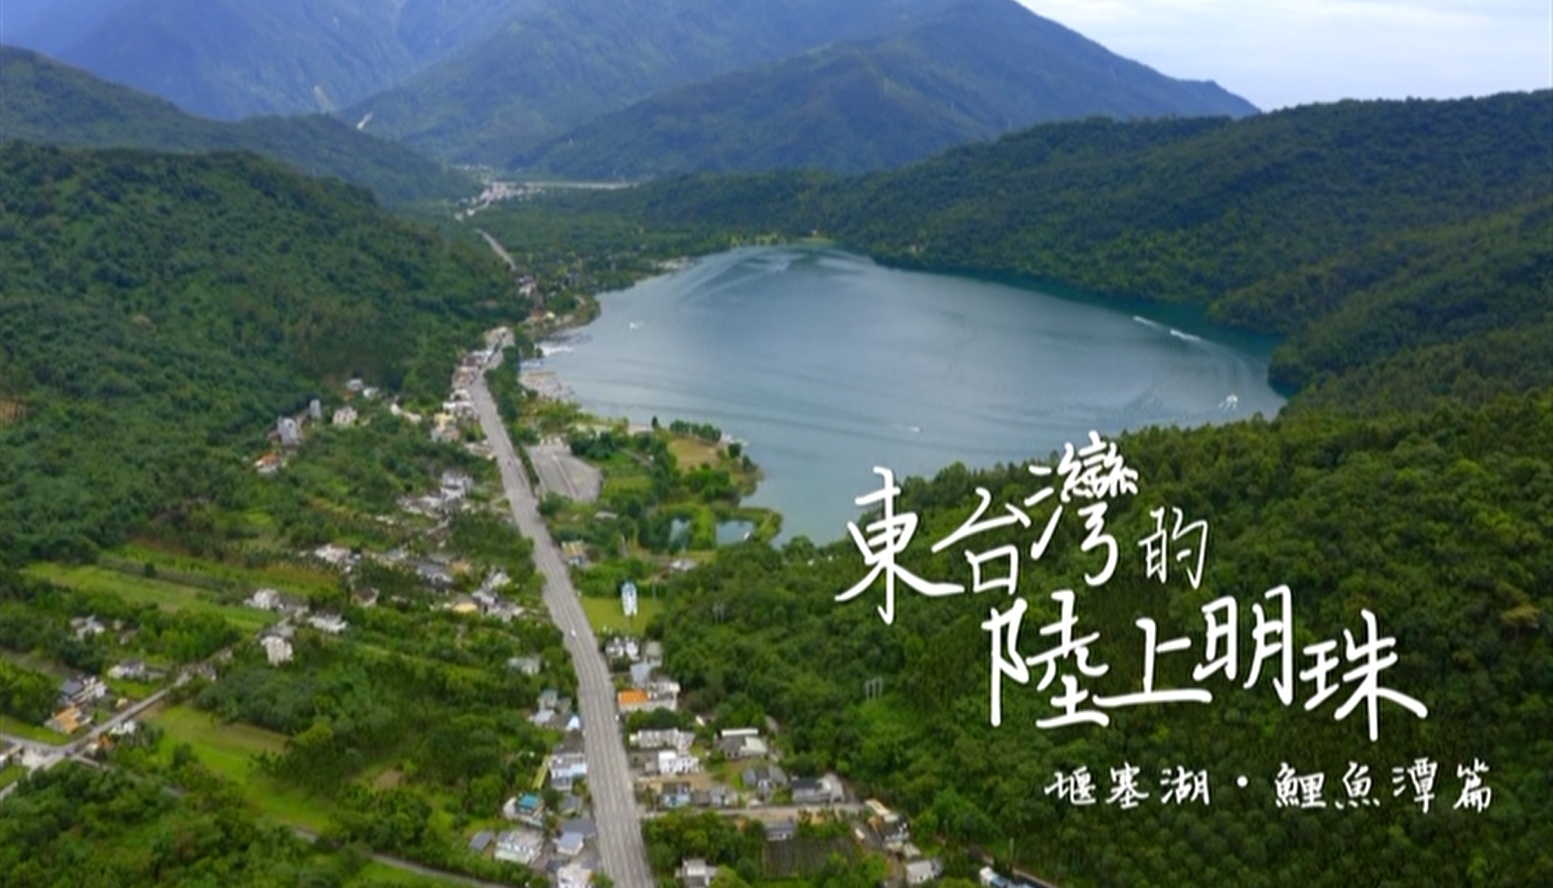 East Rift Valley Geological Landscape Tourism Promotional Video：The Land Pearl of Eastern Taiwan: Liyu Lake, Barrier Lake Collection Chinese